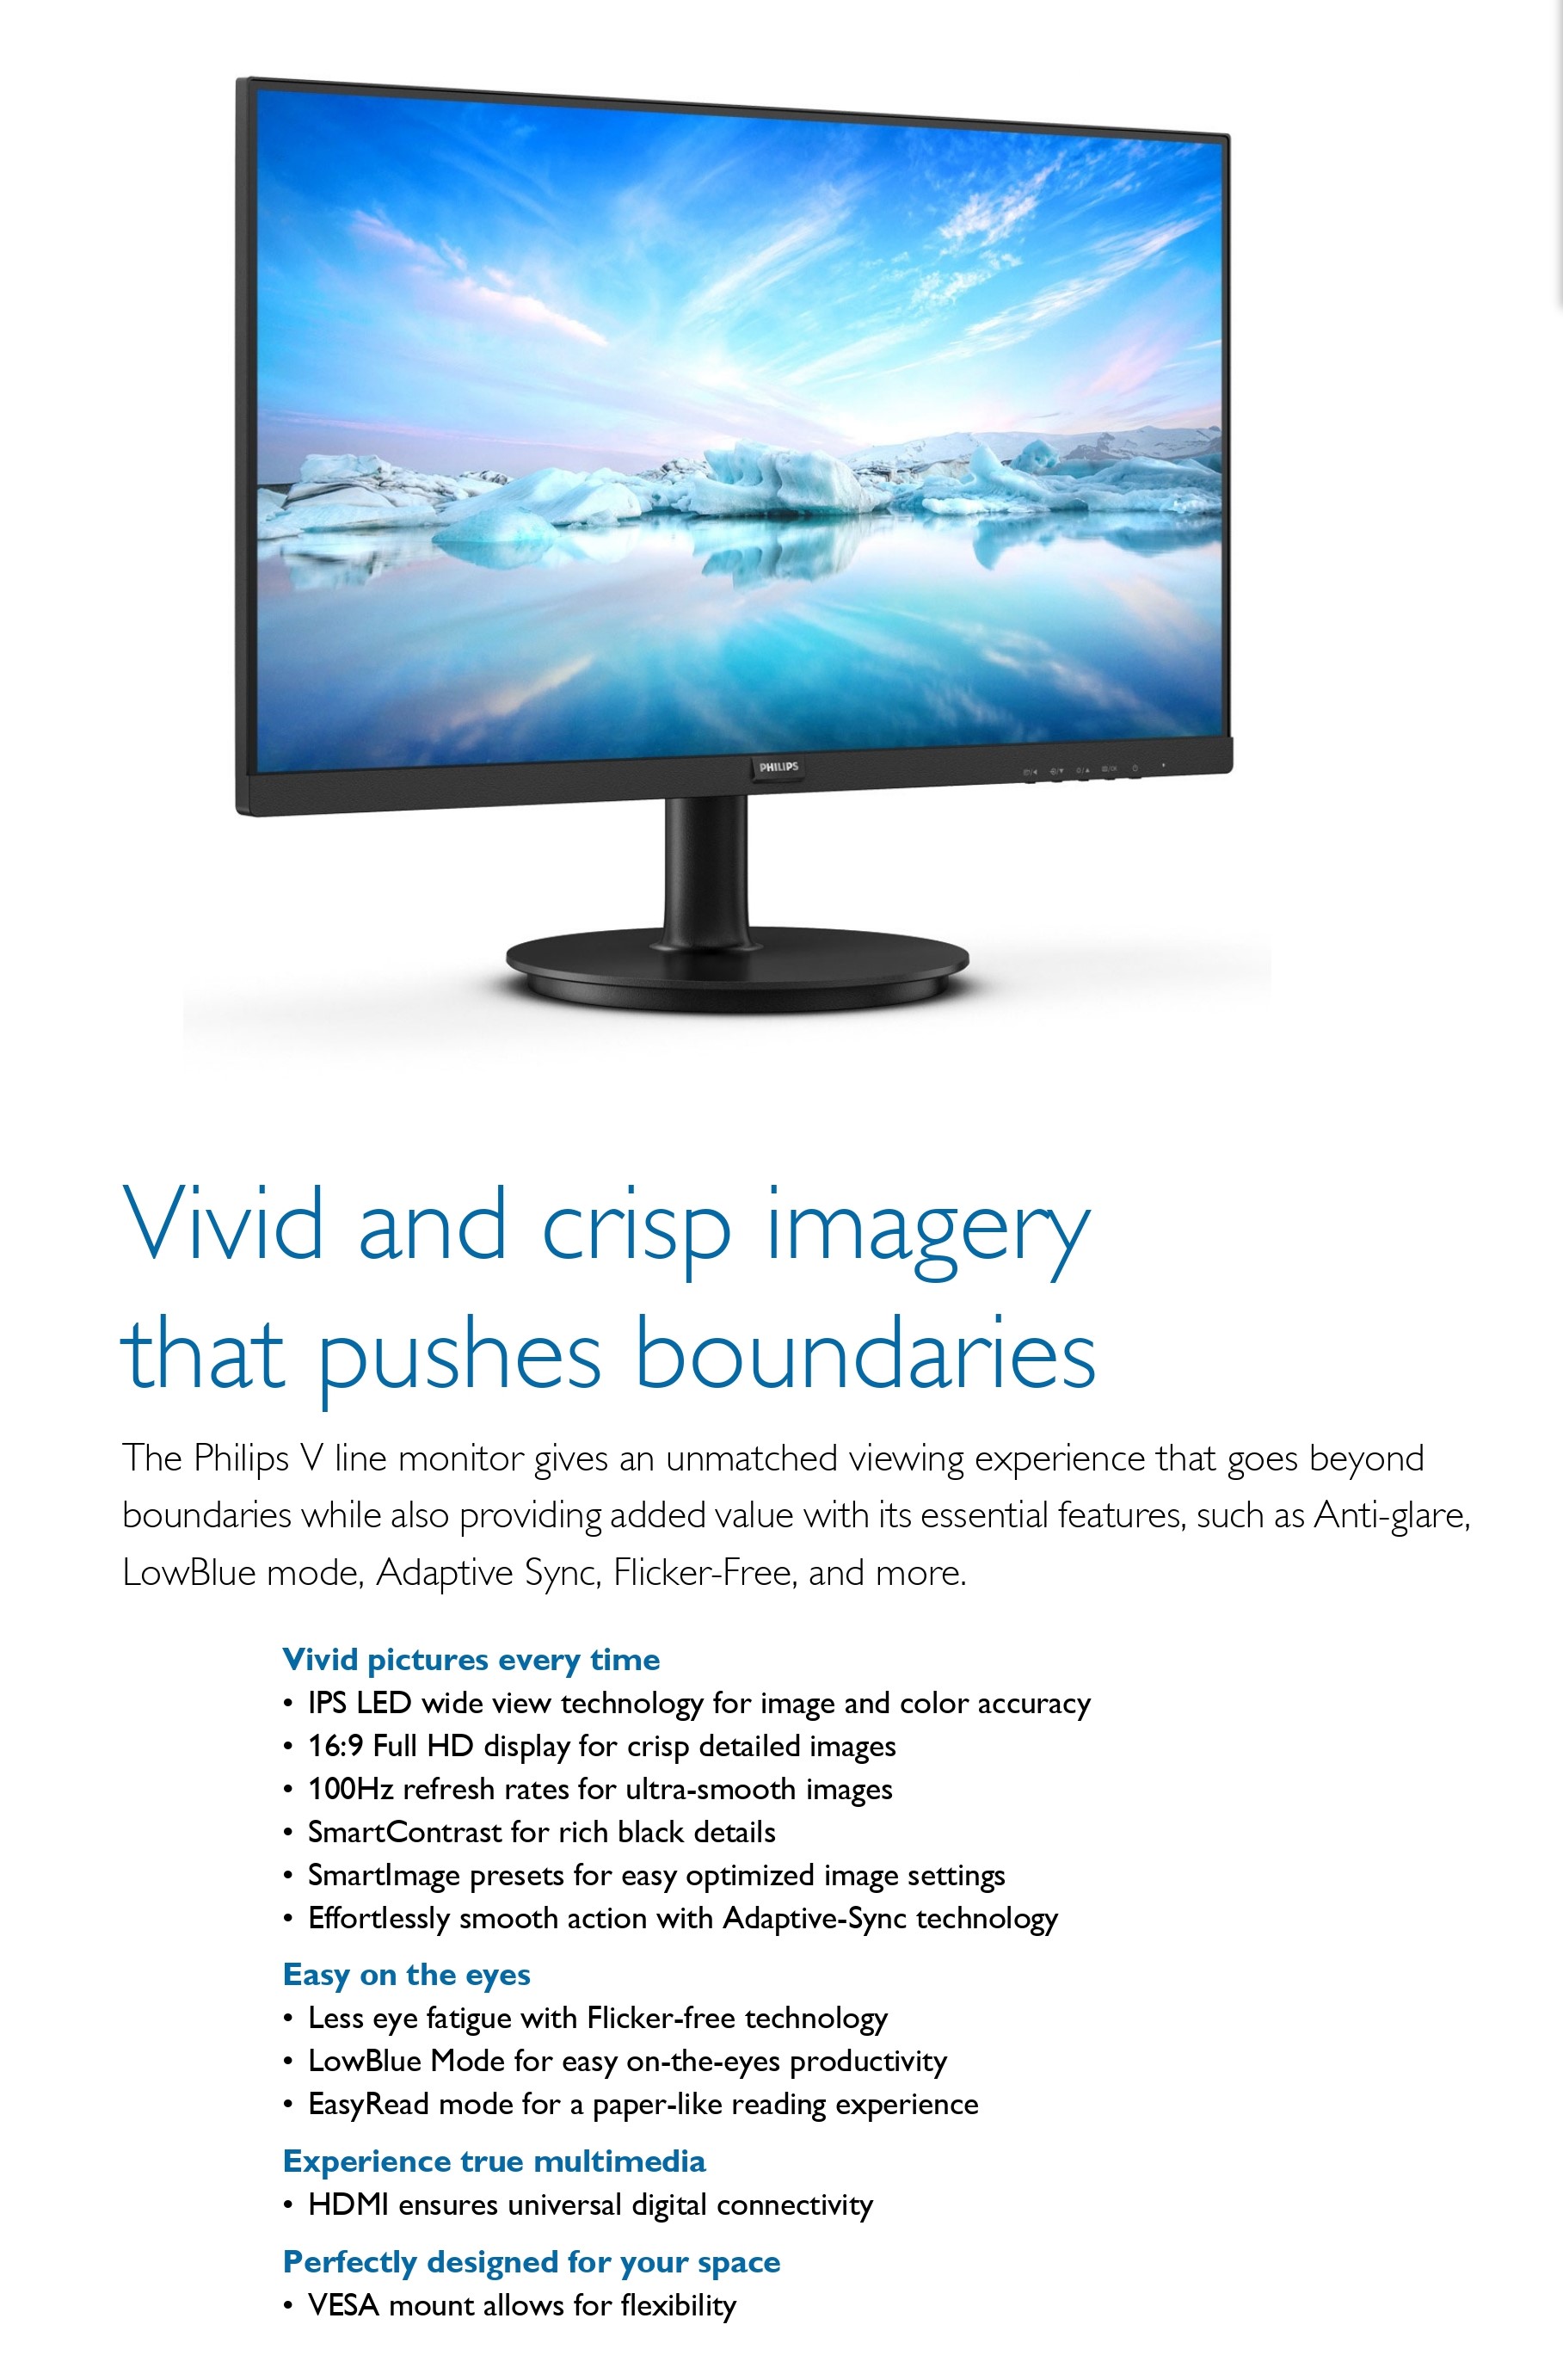 A large marketing image providing additional information about the product Philips 271V8B 27" FHD 100Hz IPS Monitor - Additional alt info not provided